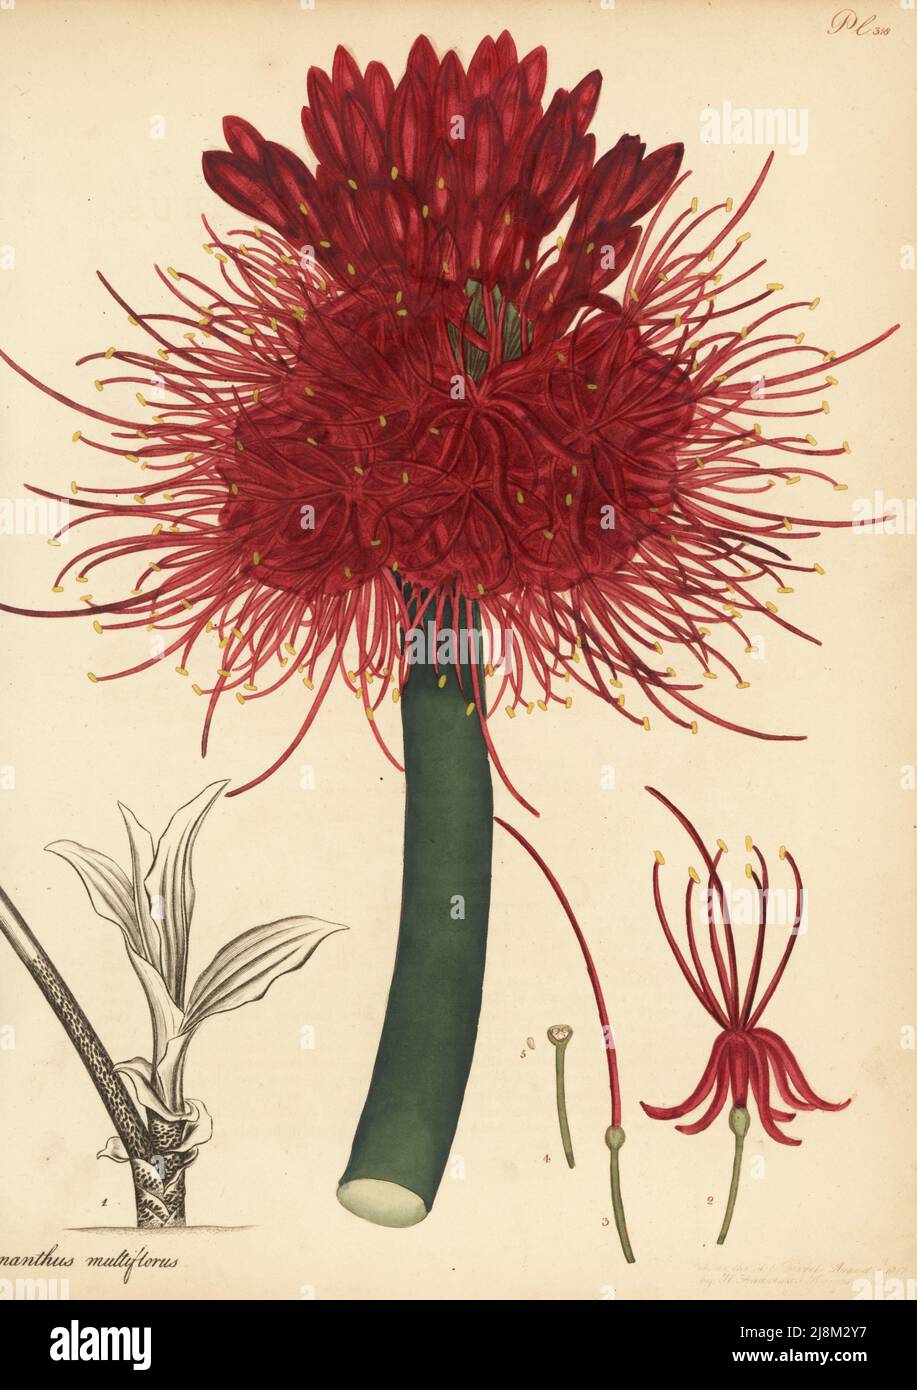 Blood lily, Scadoxus multiflorus. Many-flowered blood-flower, Haemanthus multiflorus. From Africa, in Lee and Kennedy's  Hammersmith Nursery. Copperplate engraving drawn, engraved and hand-coloured by Henry Andrews from his Botanical Register, Volume 5, self-published in Knightsbridge, London, 1803. Stock Photo